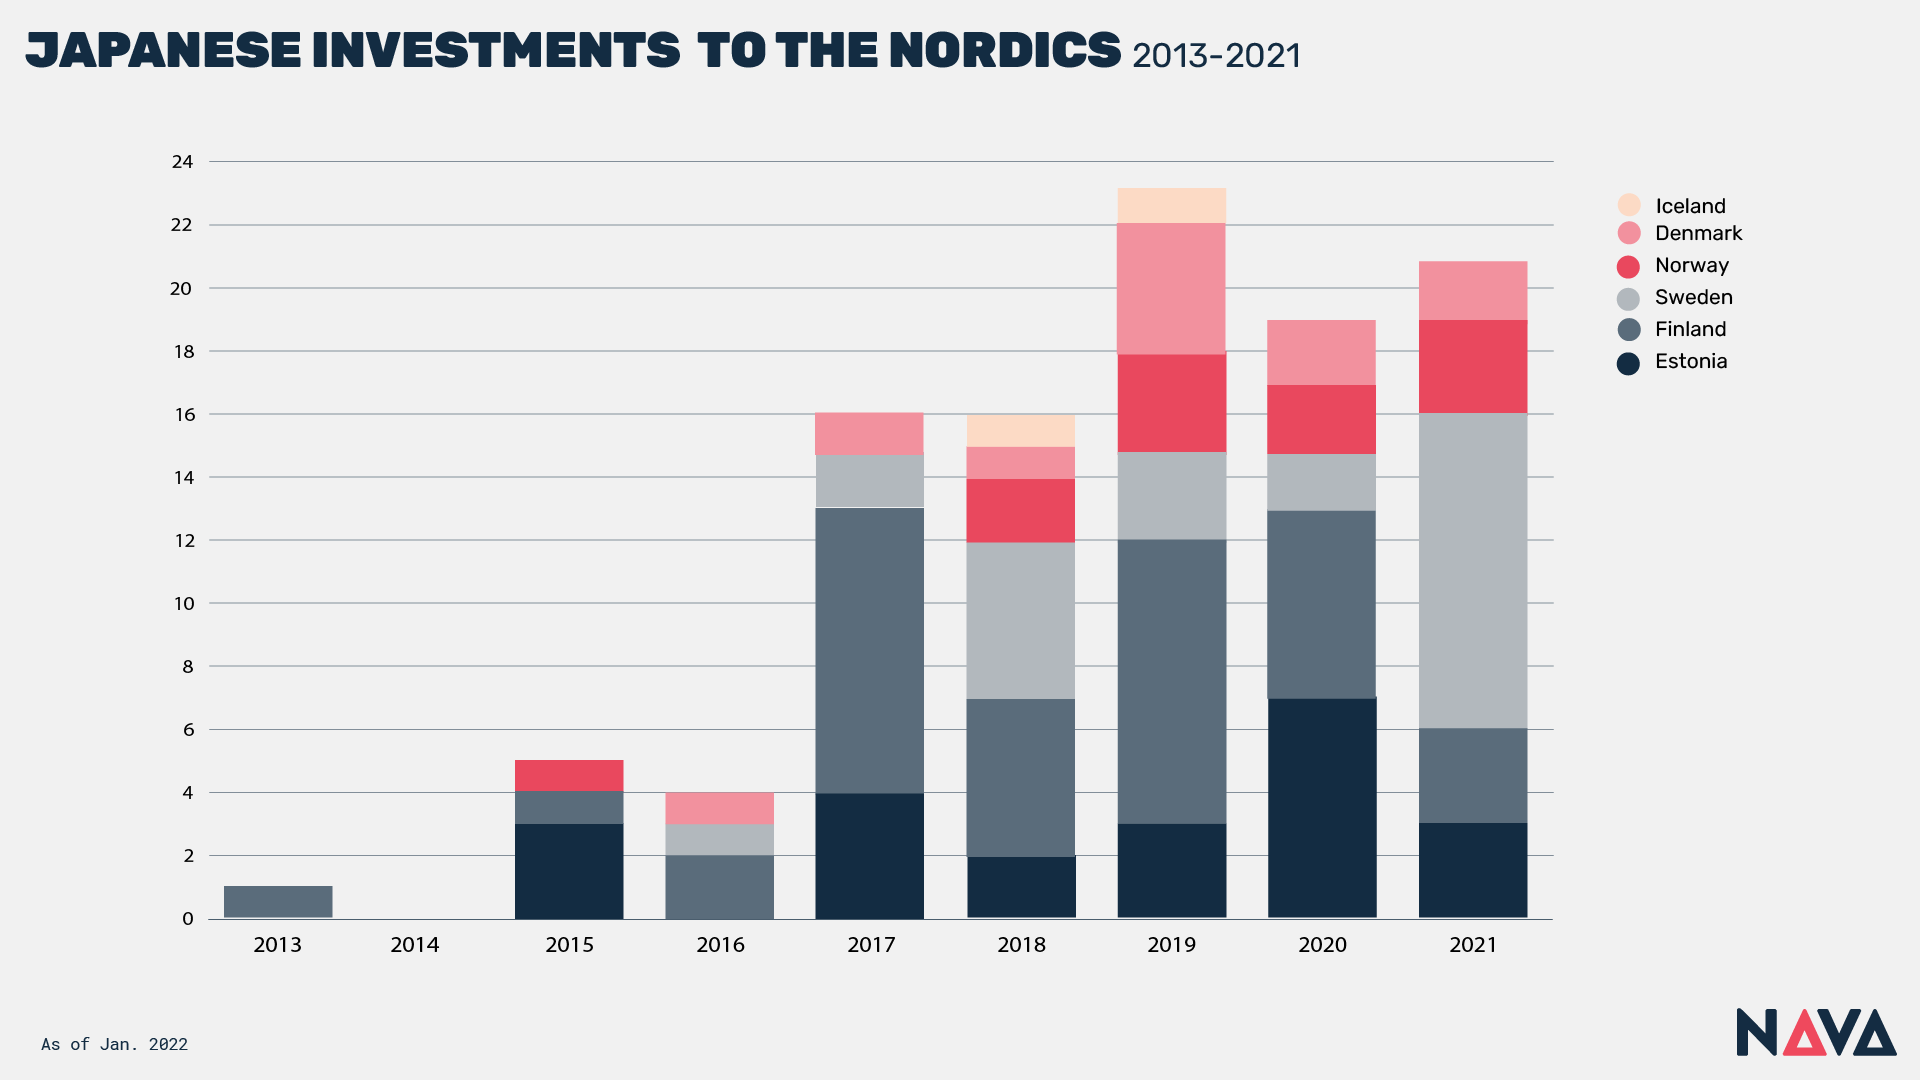 JP investments to the Nordics 2013-19. Bar chart